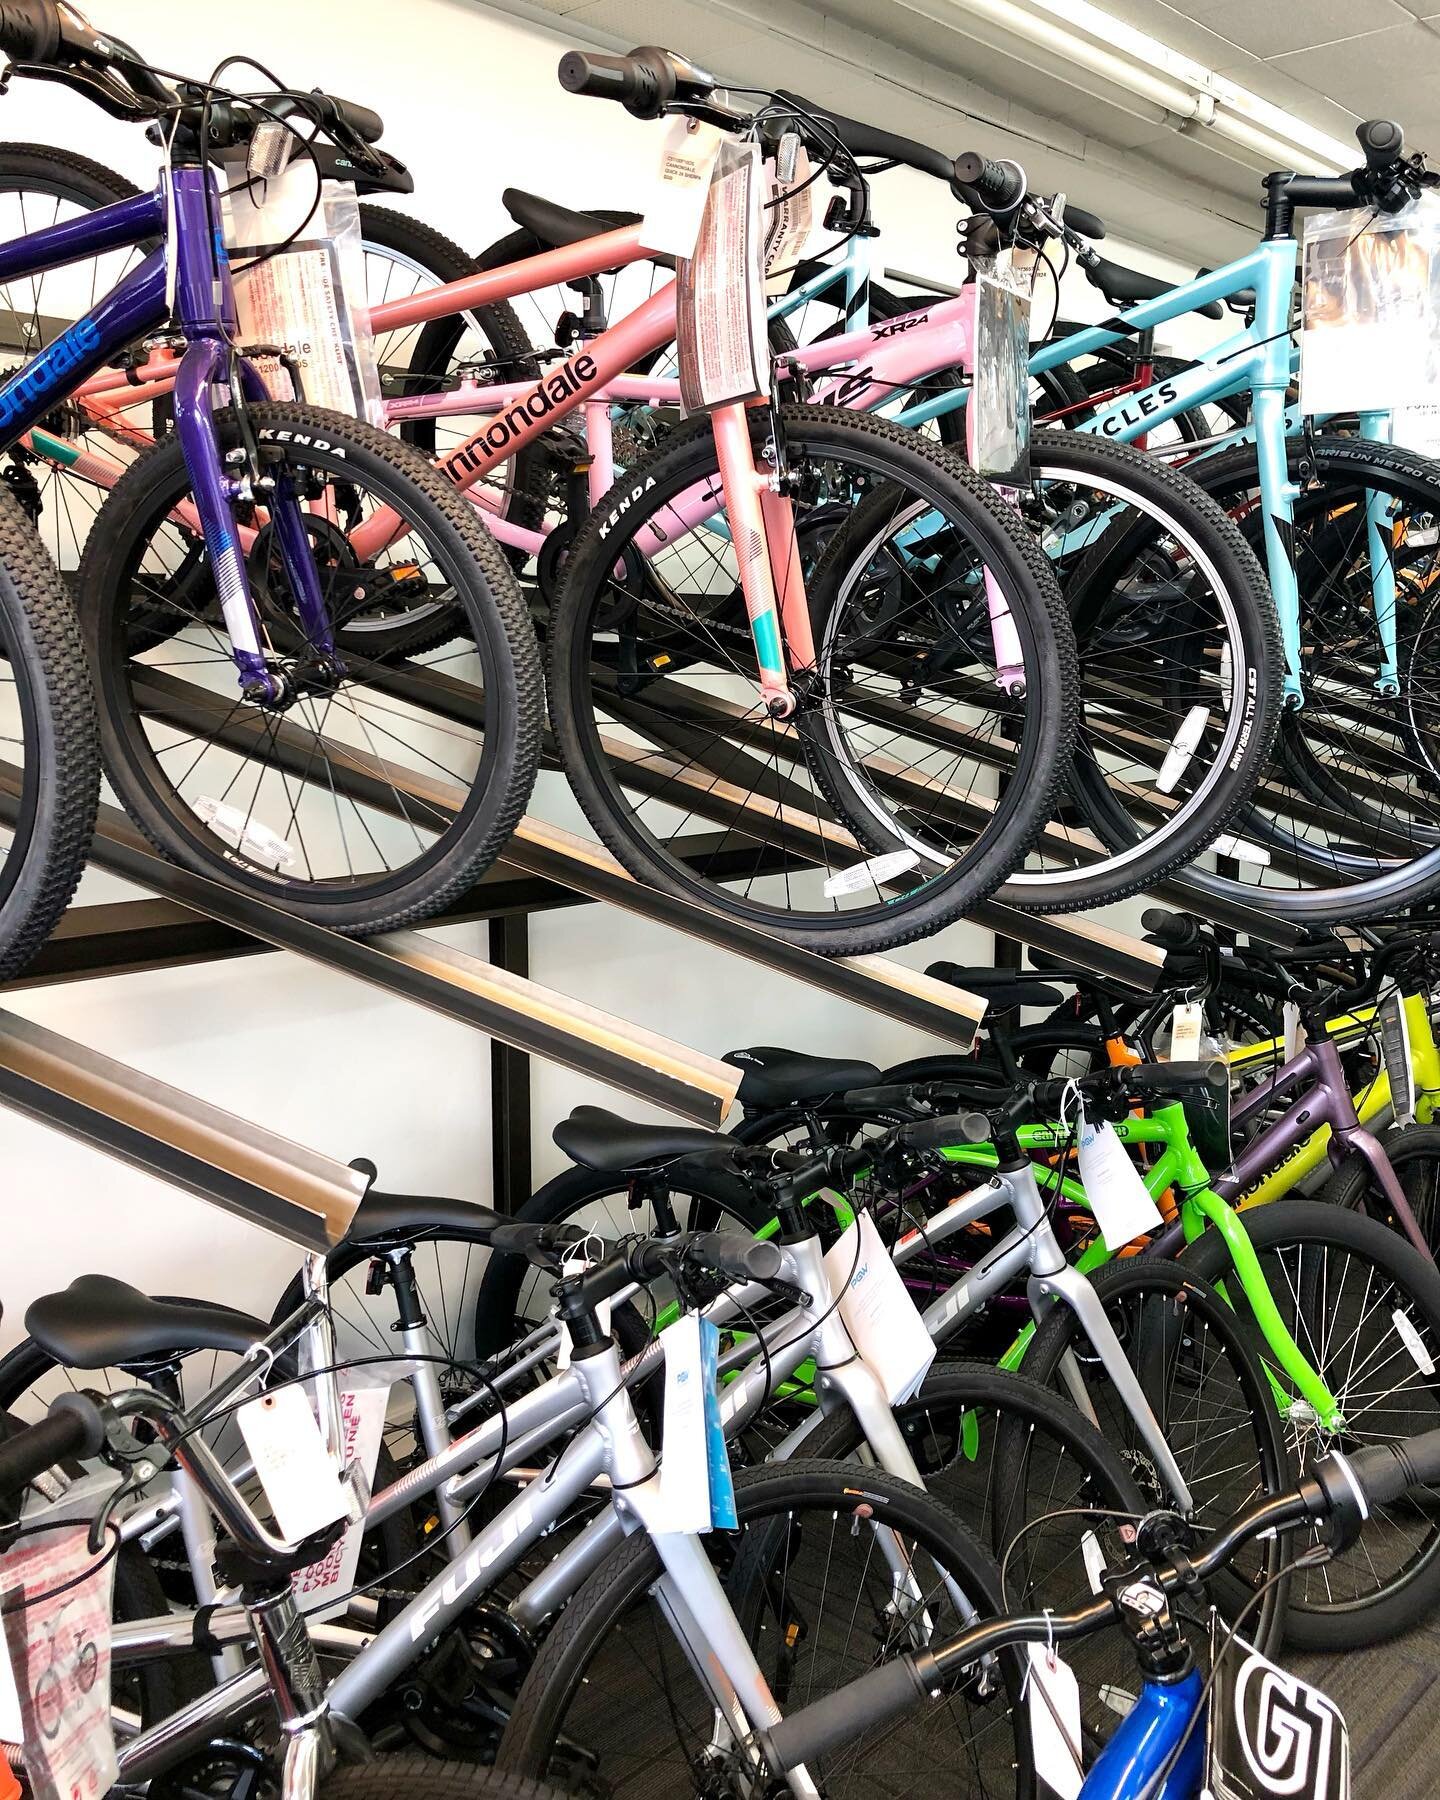 Bike sale!⚡️This month, Cannondale, Salsa and DK bicycles are all 20% off. Gazelle e-bikes are 15% off. There&rsquo;s beautiful weather ahead of us! Come in now 🤗

#jimsbicycleshop #ebike #e-bike #cargo #bicycleshop #shoplocal #ride #bike #bikeride 